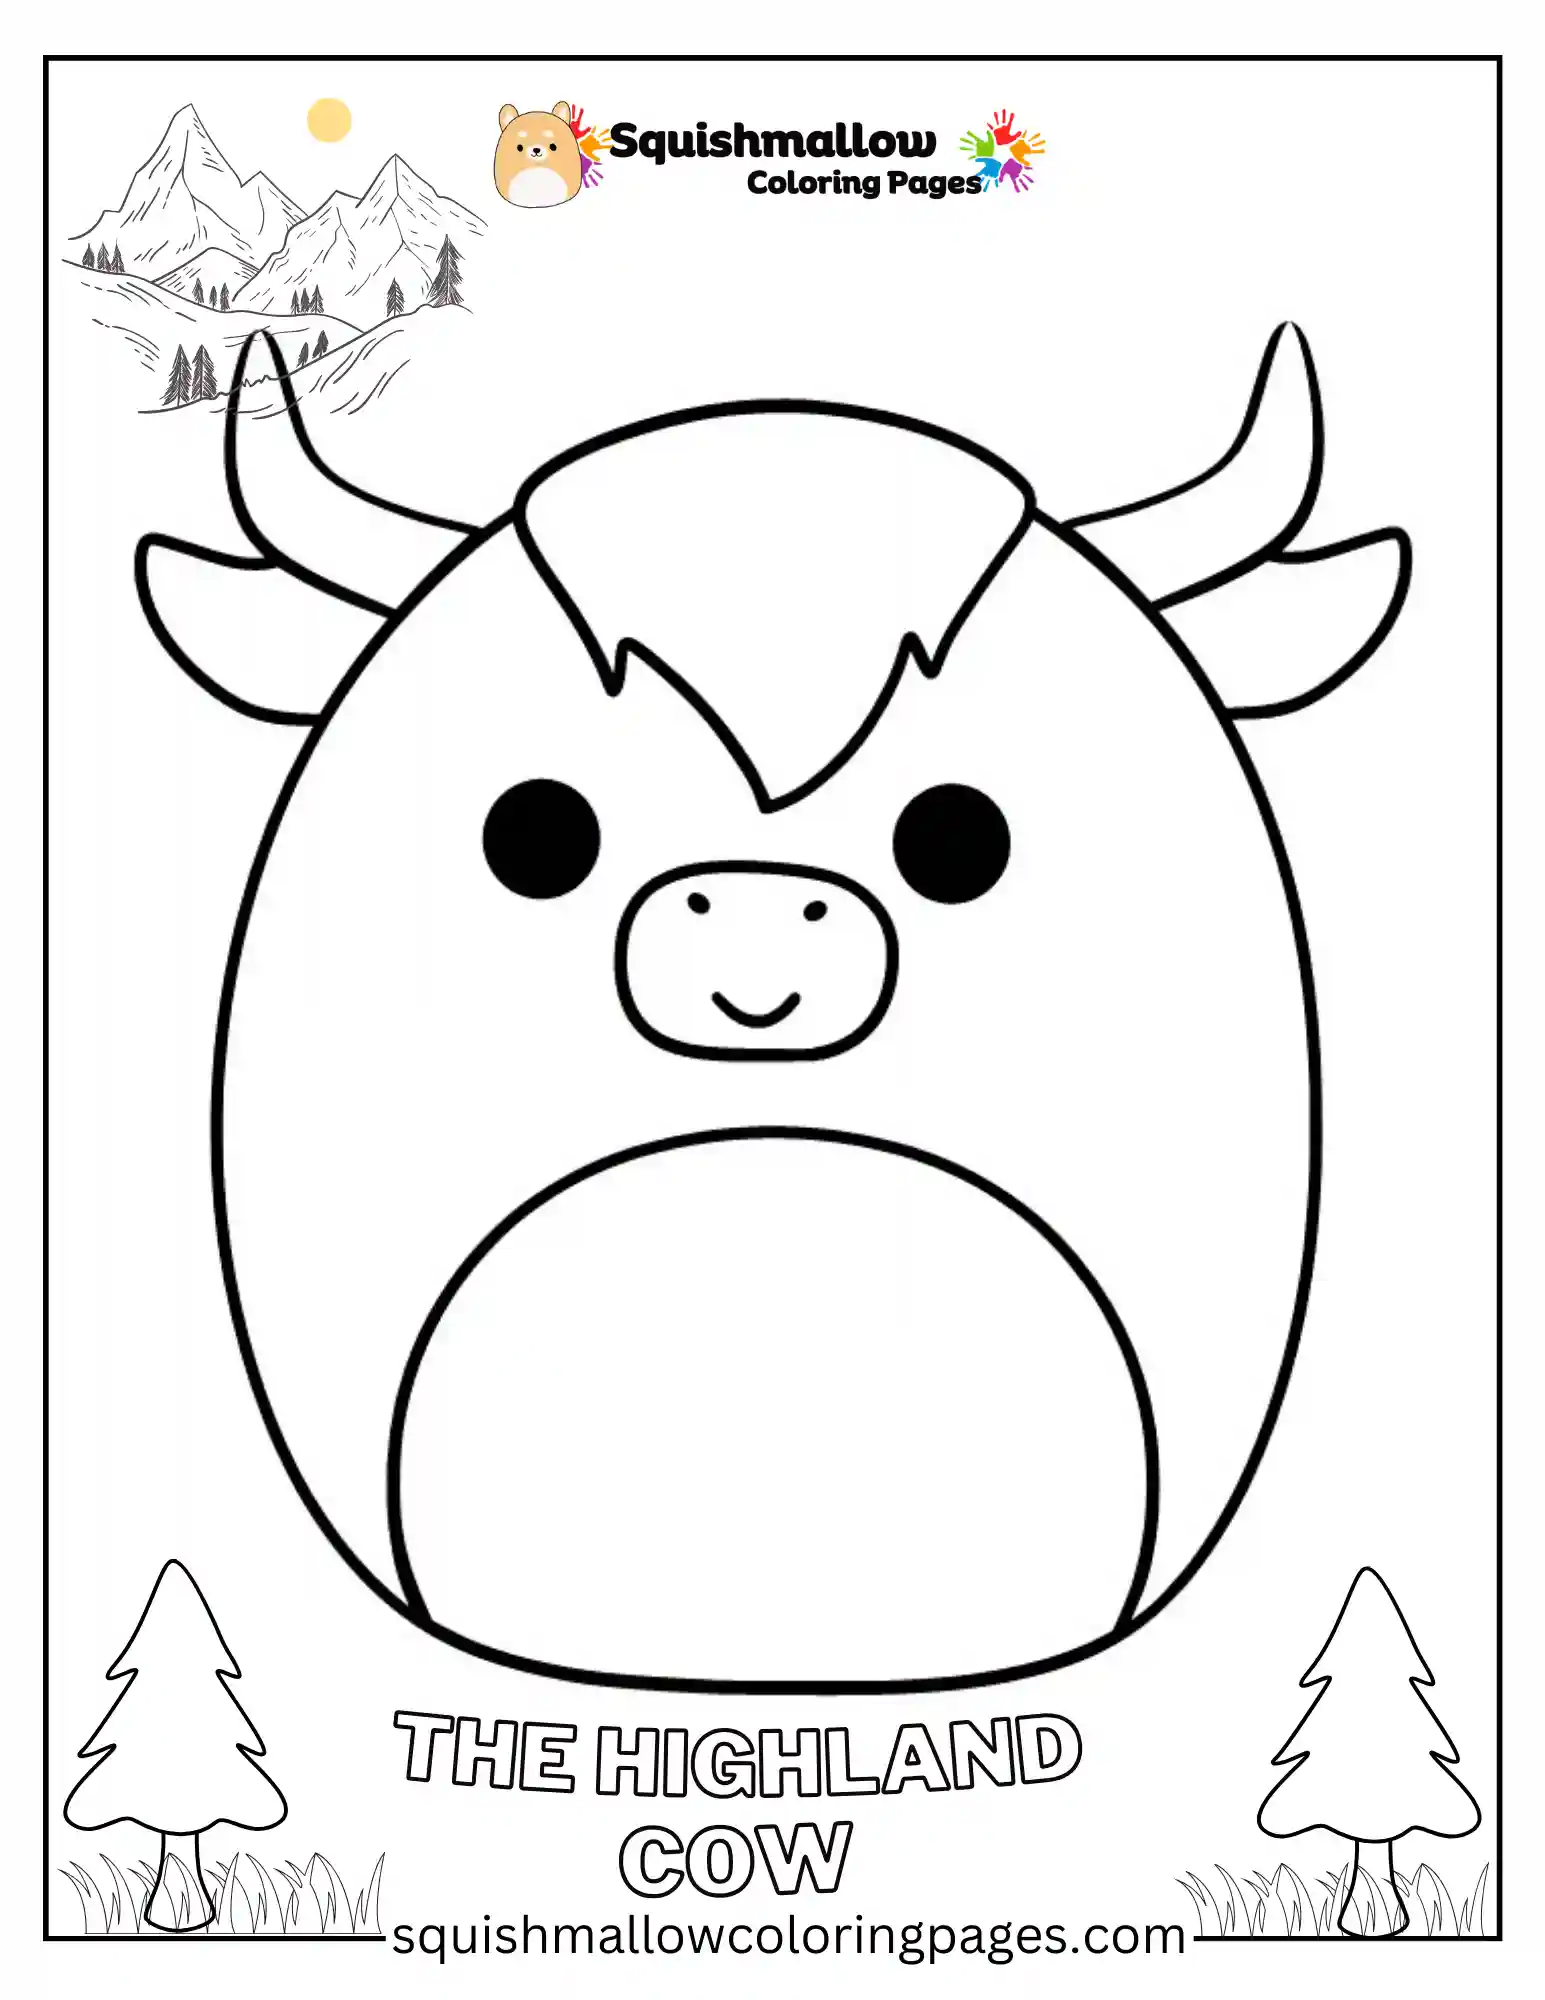 The Highland Cow Squishmallow Coloring Pages